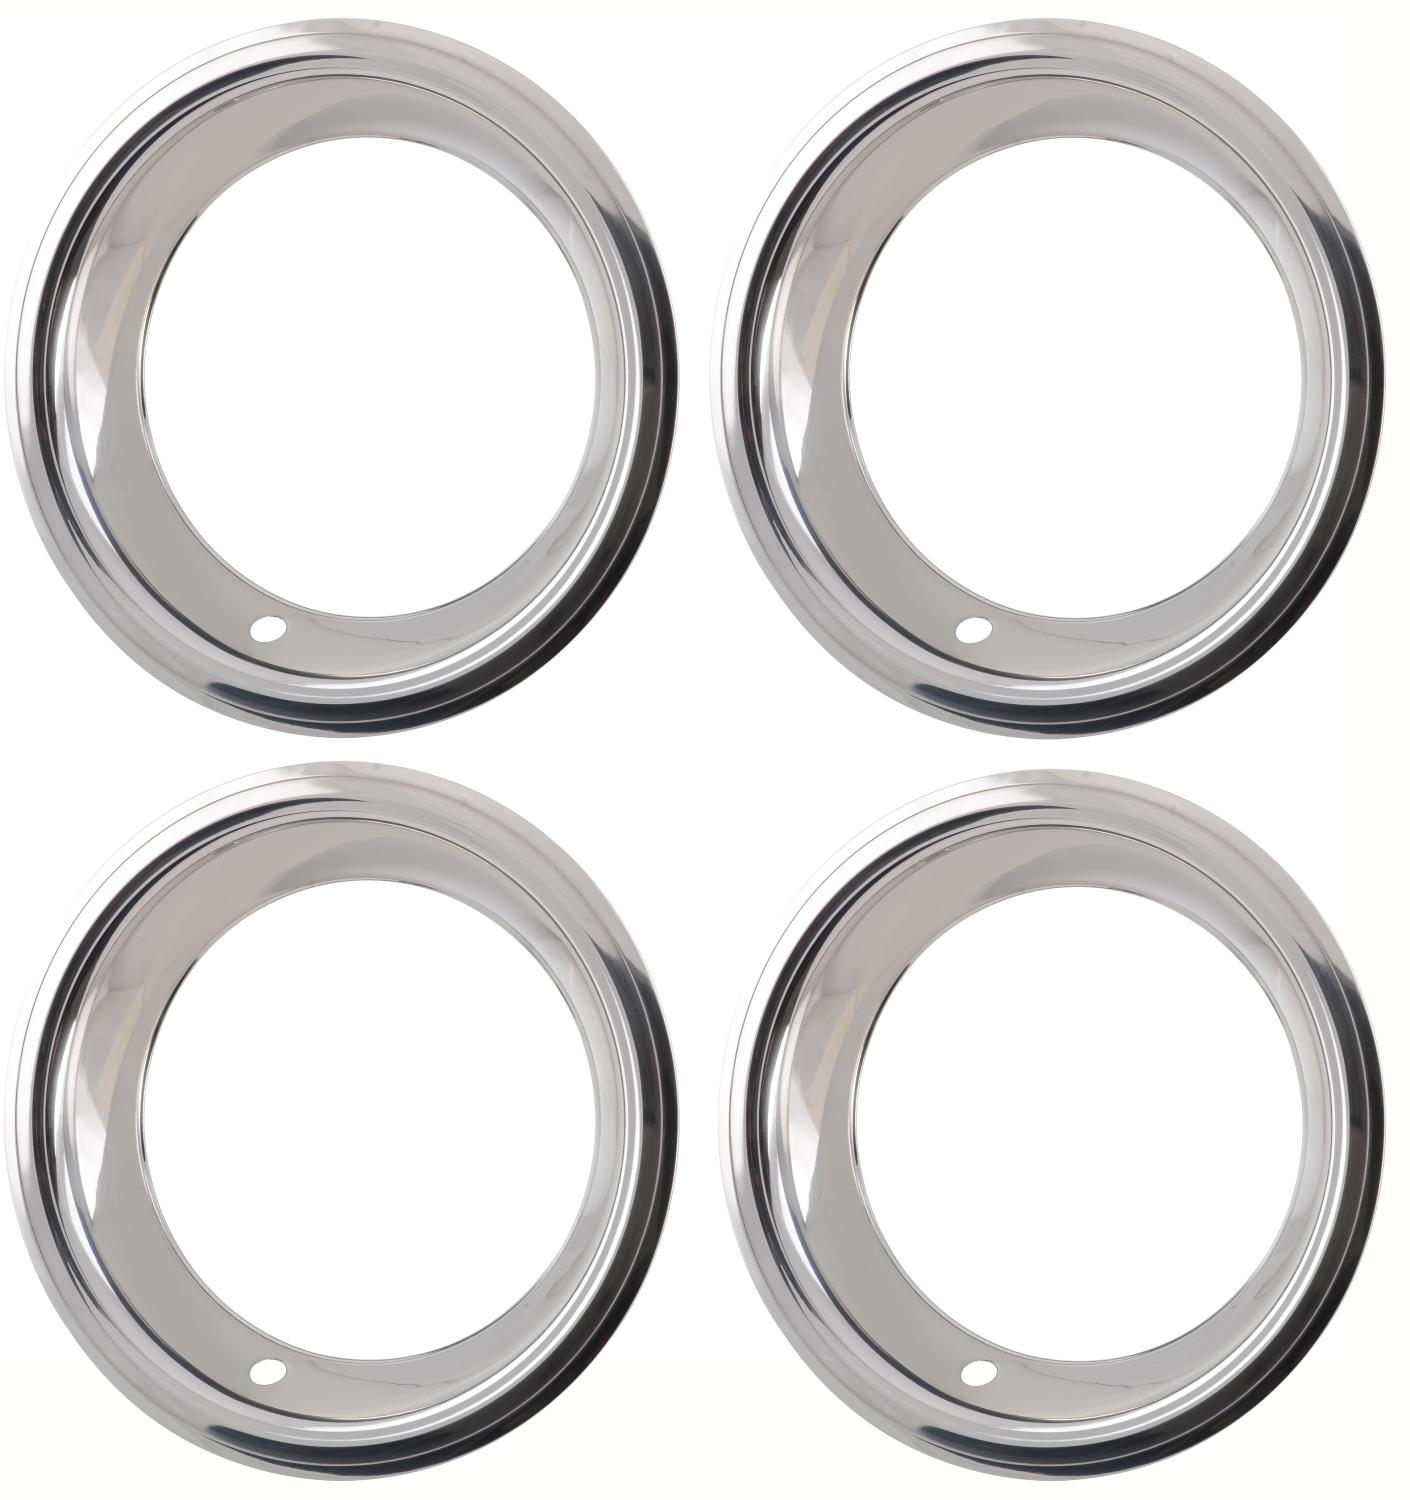 Rally Wheel Trim Ring Set for JEGS 15 in. x 7 in. Rally Wheels [4-Piece]